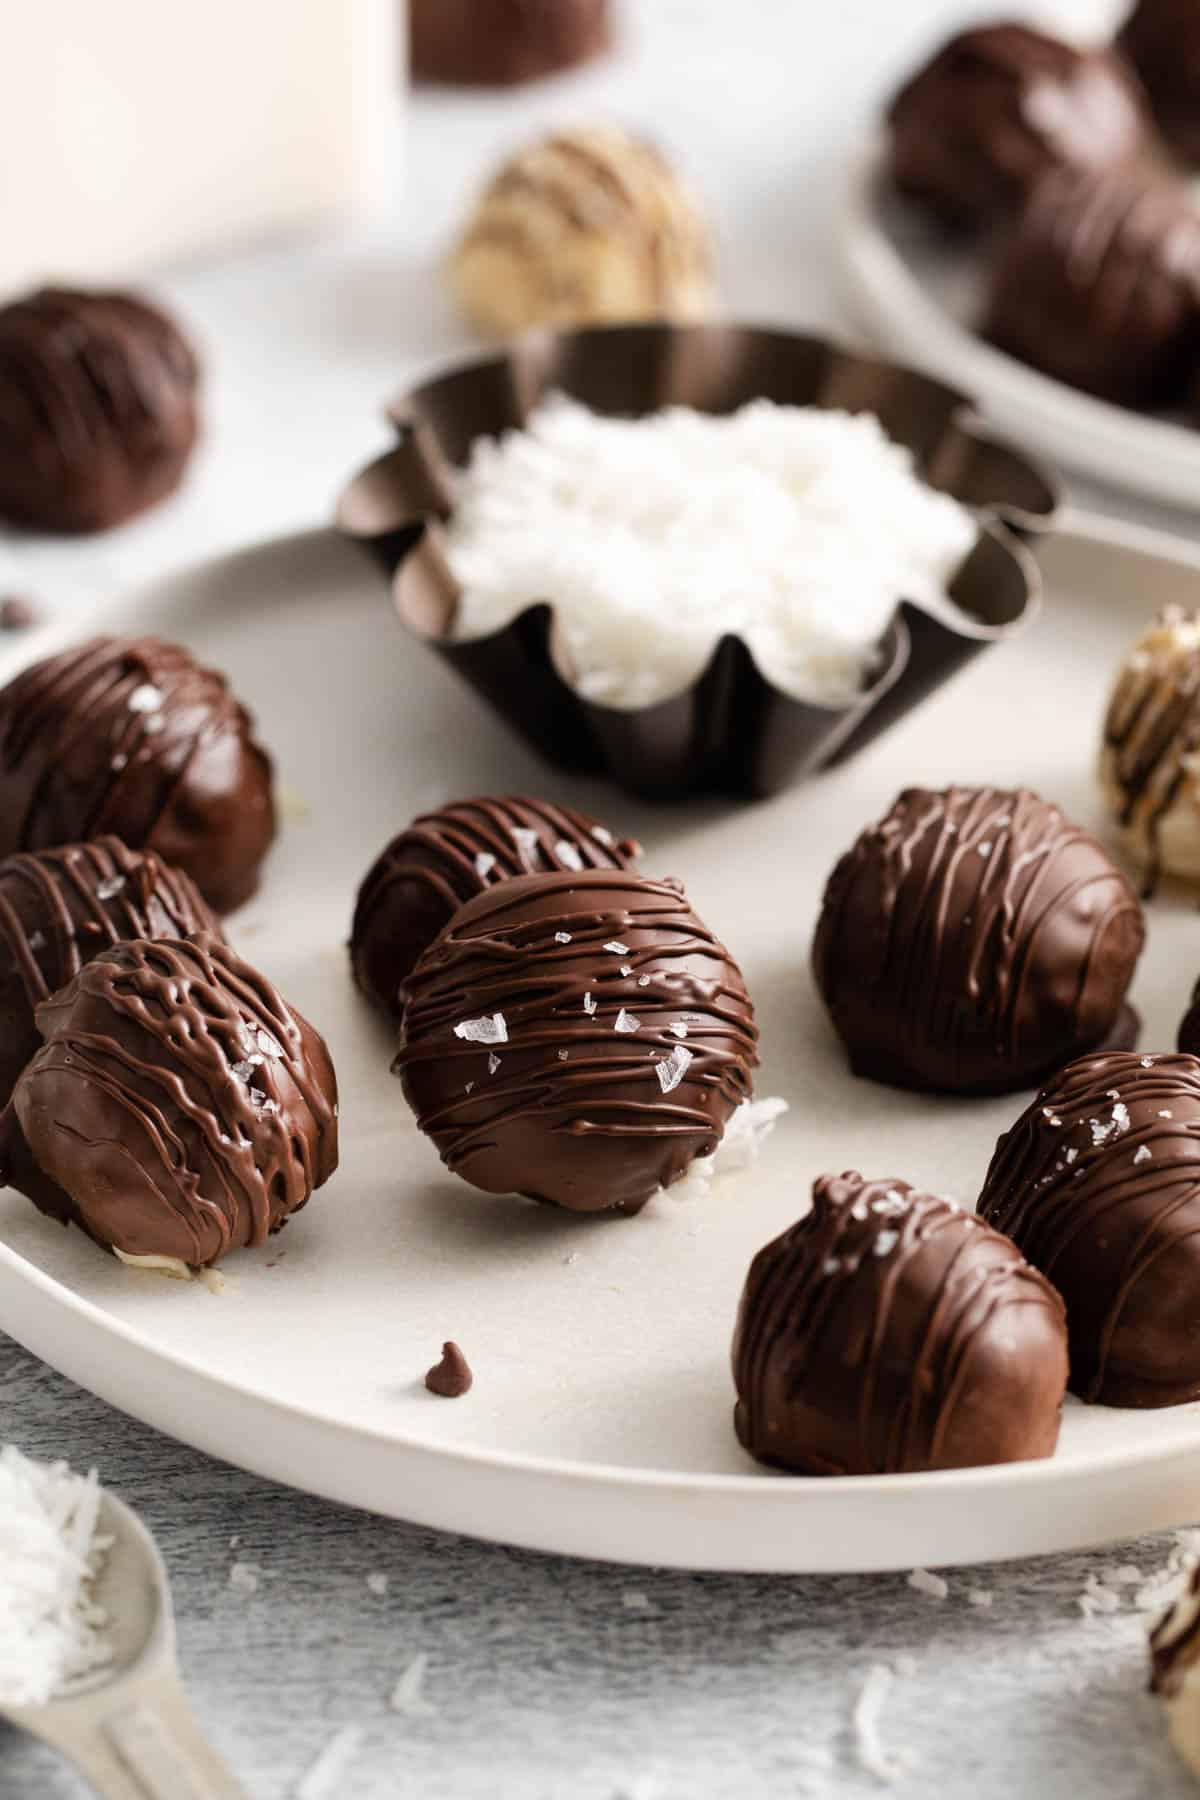 An image of chocolate covered coconut balls on a plate.